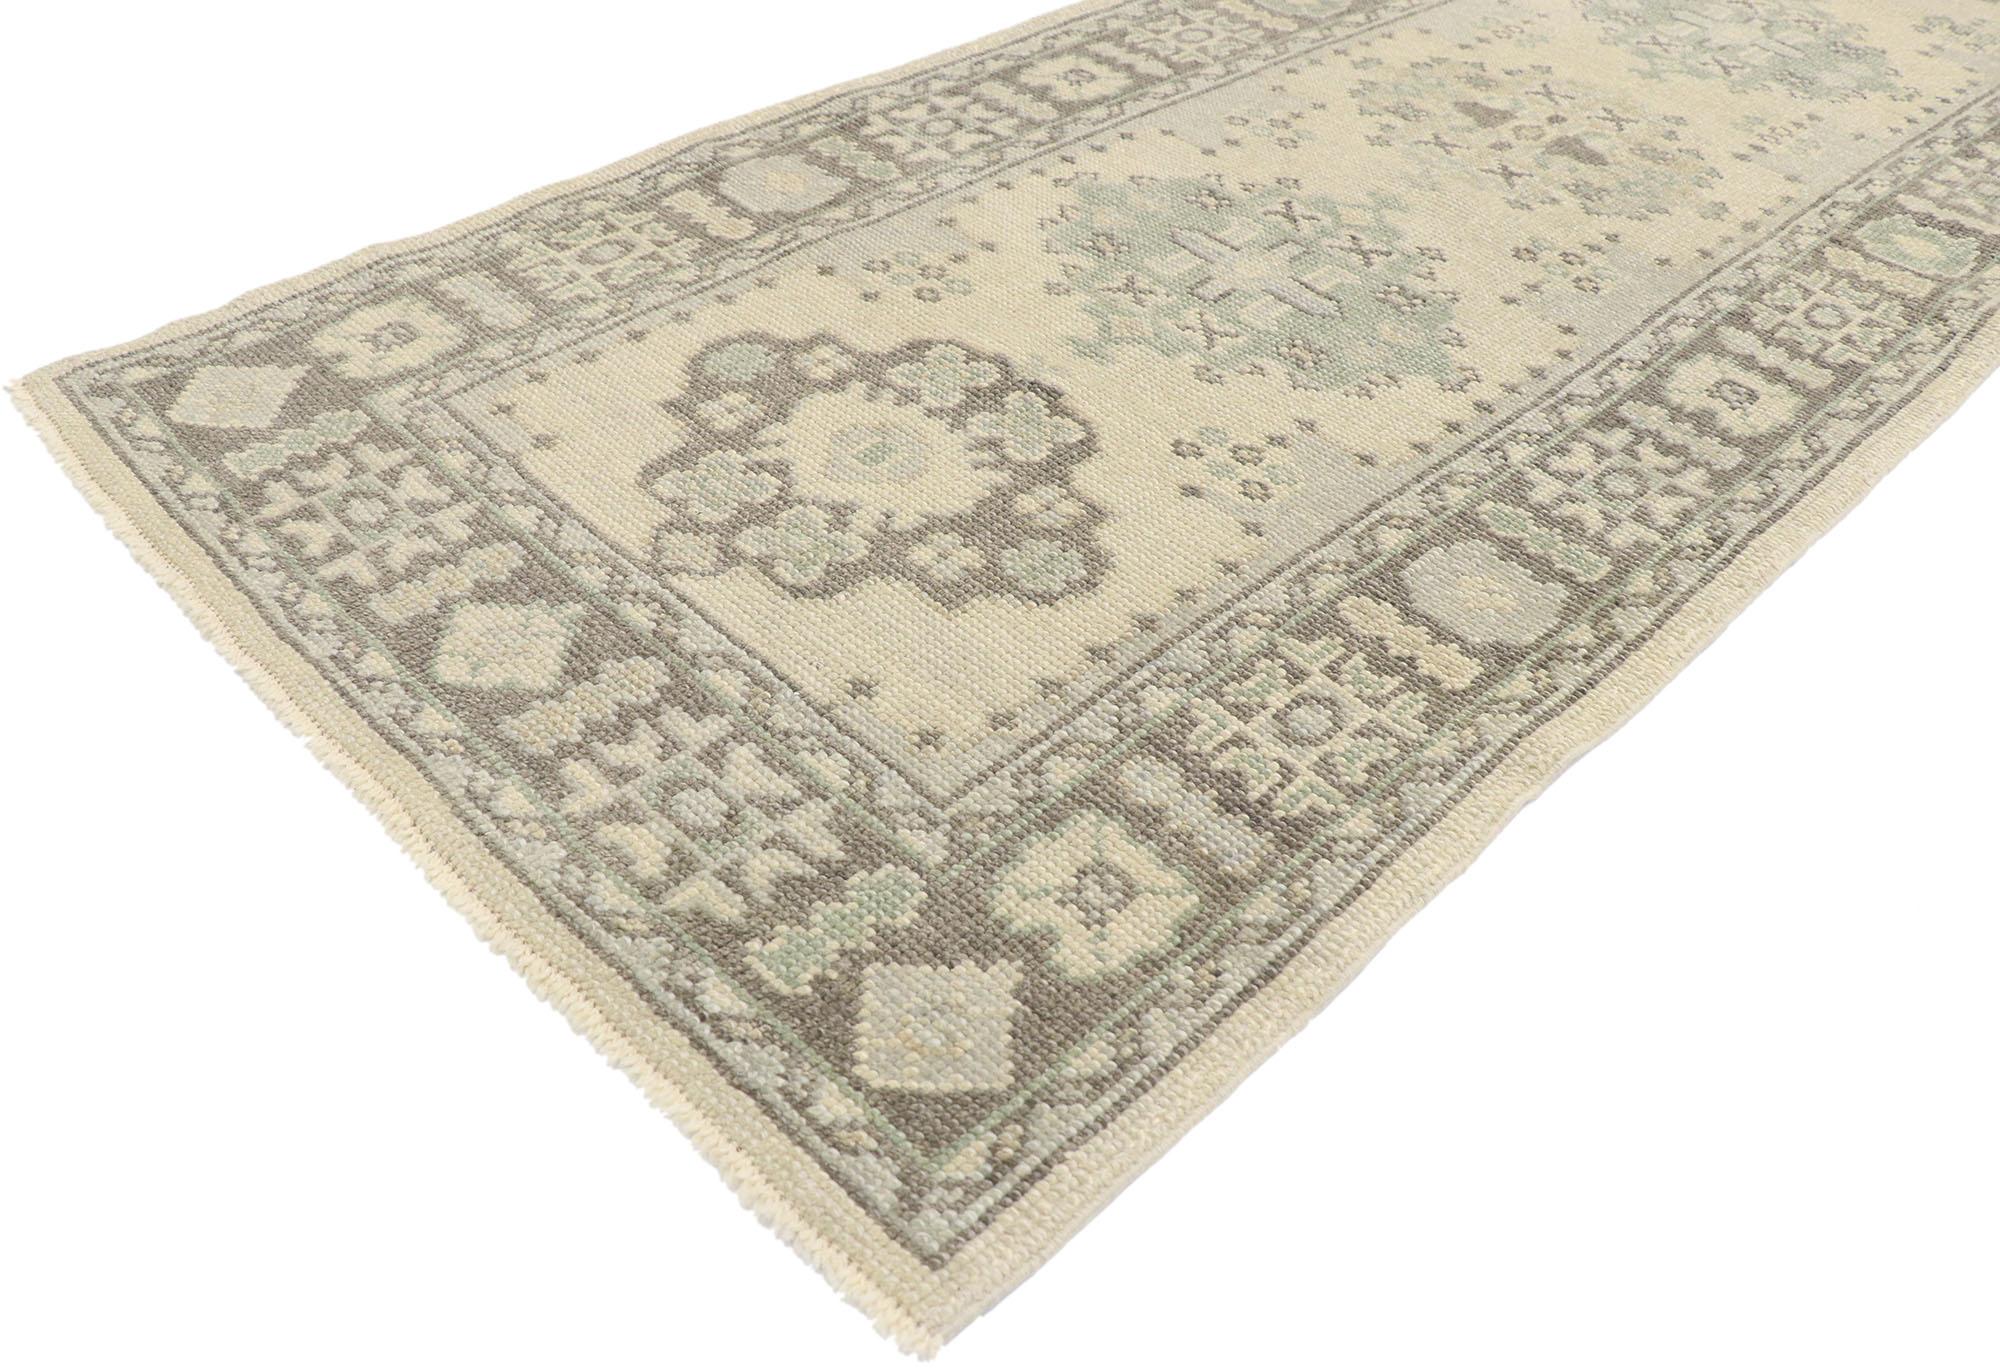 53544, new Contemporary Turkish Oushak runner with Modern Transitional style. Elegant simplicity meets modern style in this hand-knotted wool contemporary Turkish Oushak runner. The abrashed beige field features ornate medallions patterned with